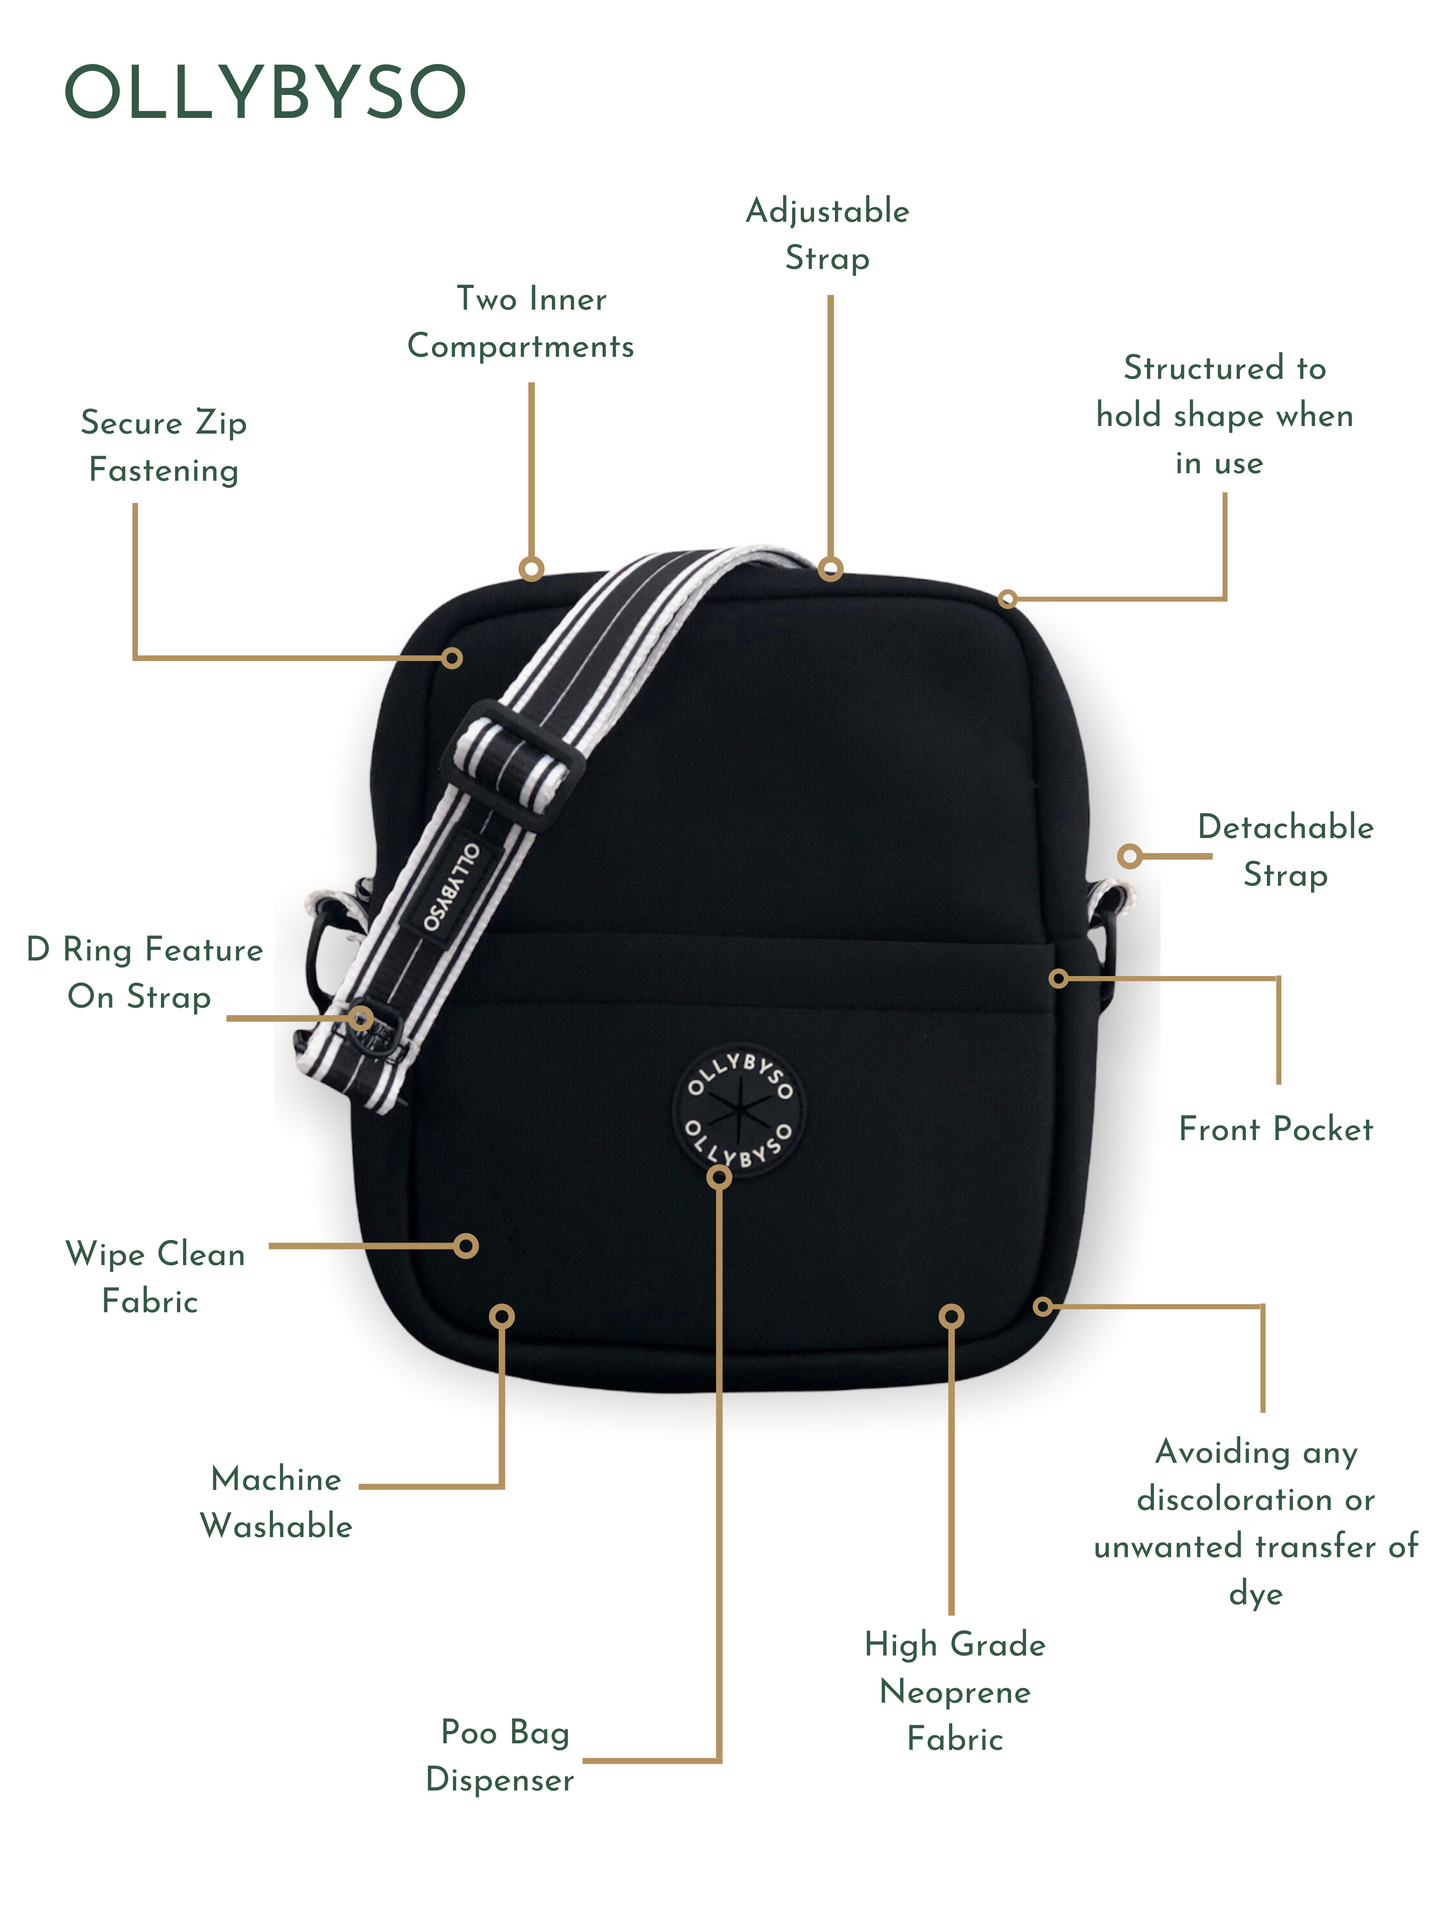 Out With The Dog Crossbody Bag - Classic Black